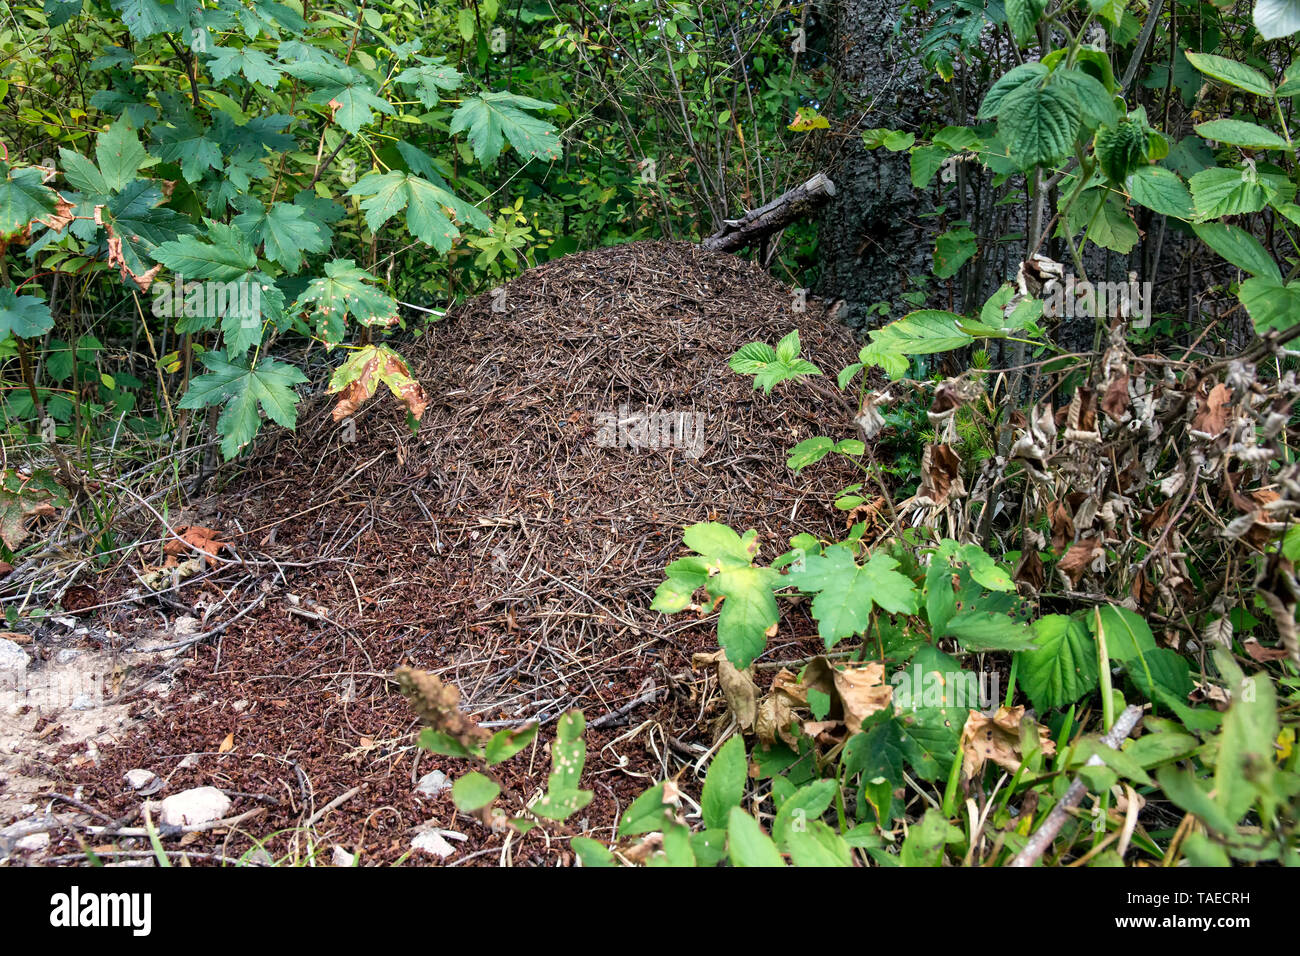 Anthill sheltering the Southern wood ant (Formica rufa) in an undergrowth at the edge of a forest path in summer, Massif des Vosges, France Stock Photo